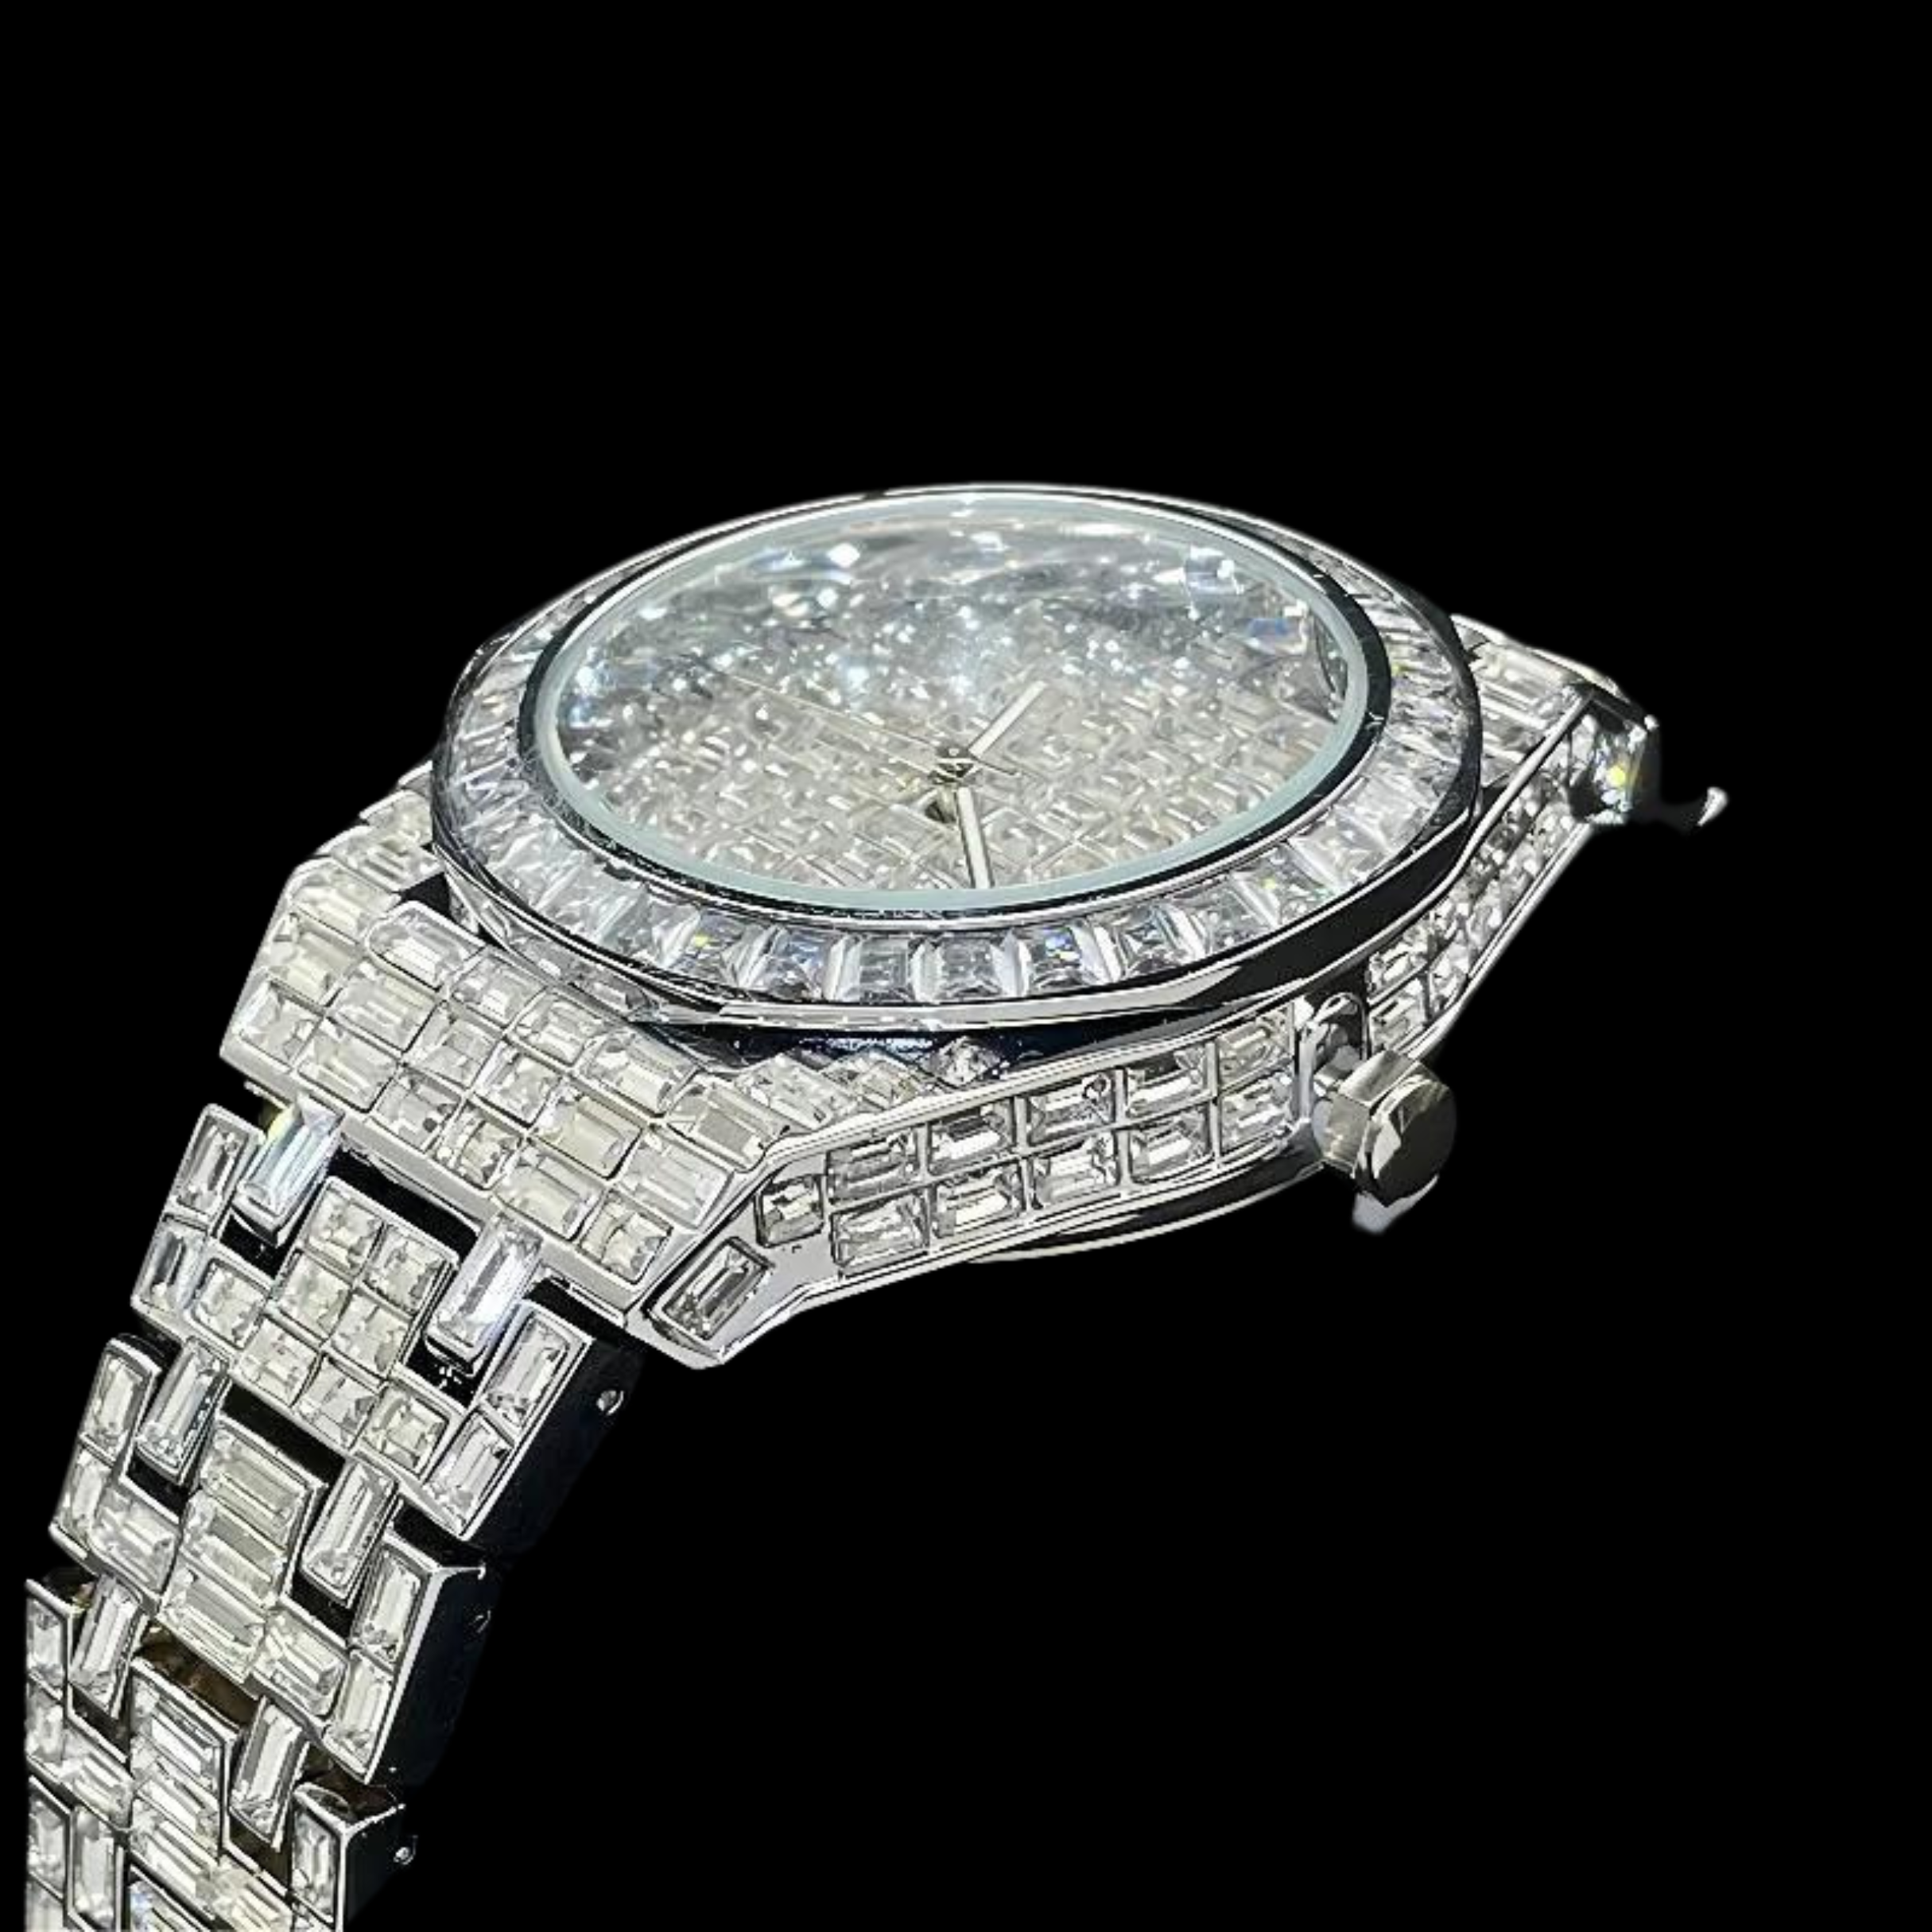 Iced Out Fully Octagon Baguette Curved Watch